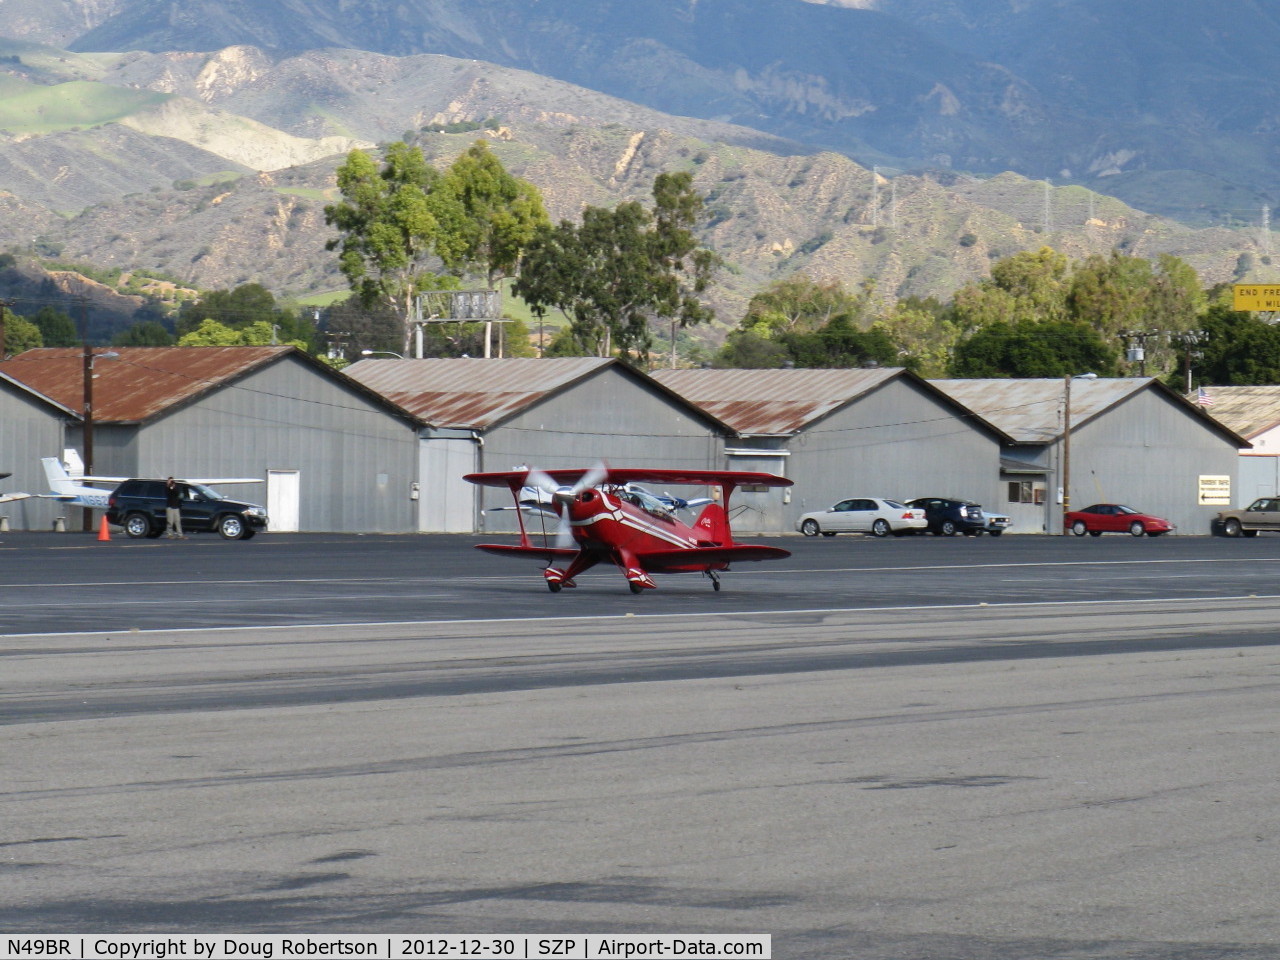 N49BR, Pitts S-2A Special C/N 2212, 1980 Aerotek PITTS S-2A, Lycoming AEIO-540 260 Hp, landing roll Rwy 22